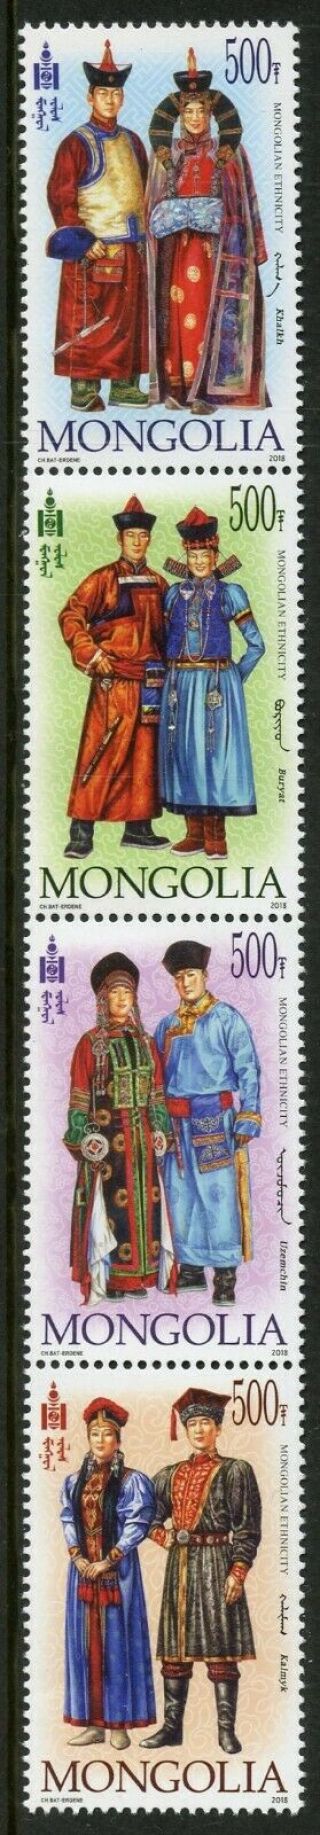 Mongolia 2019 Mnh Traditional Costumes Dress Kalmyk 4v Strip Cultures Stamps